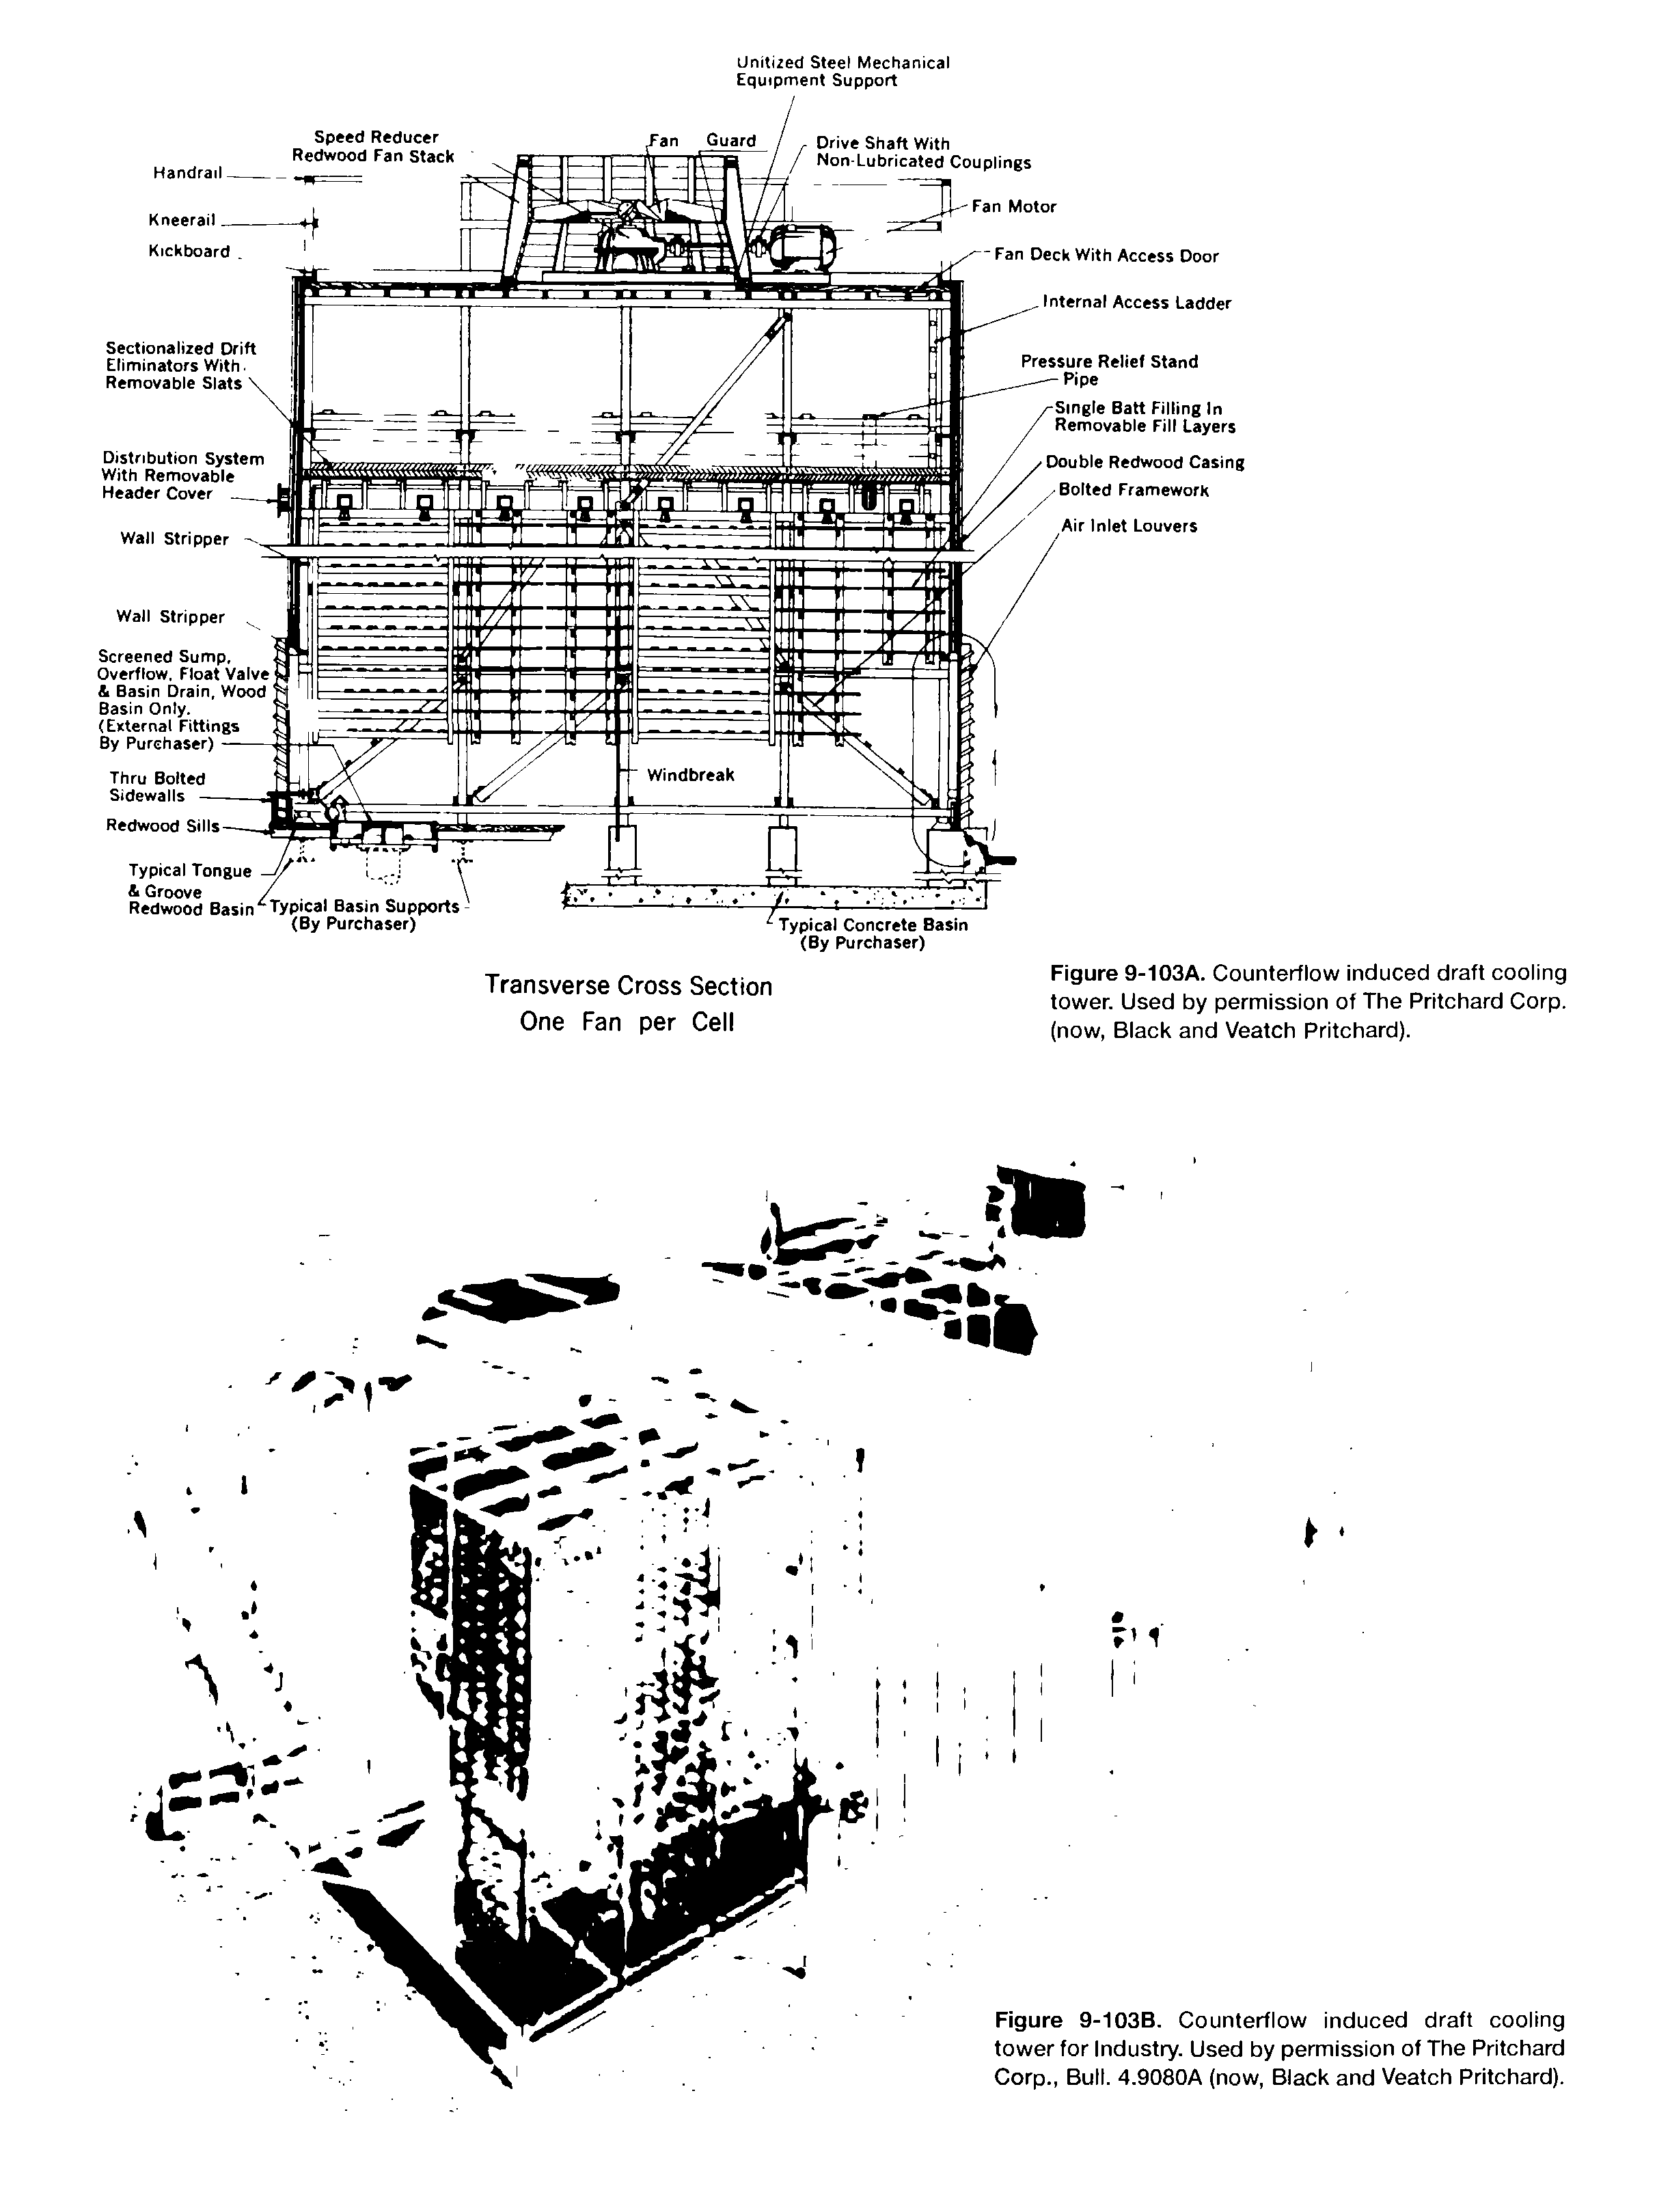 Figure 9-103A. Counterflow induced draft cooling tower. Used by permission of The Pritchard Corp. (now, Black and Veatch Pritchard).